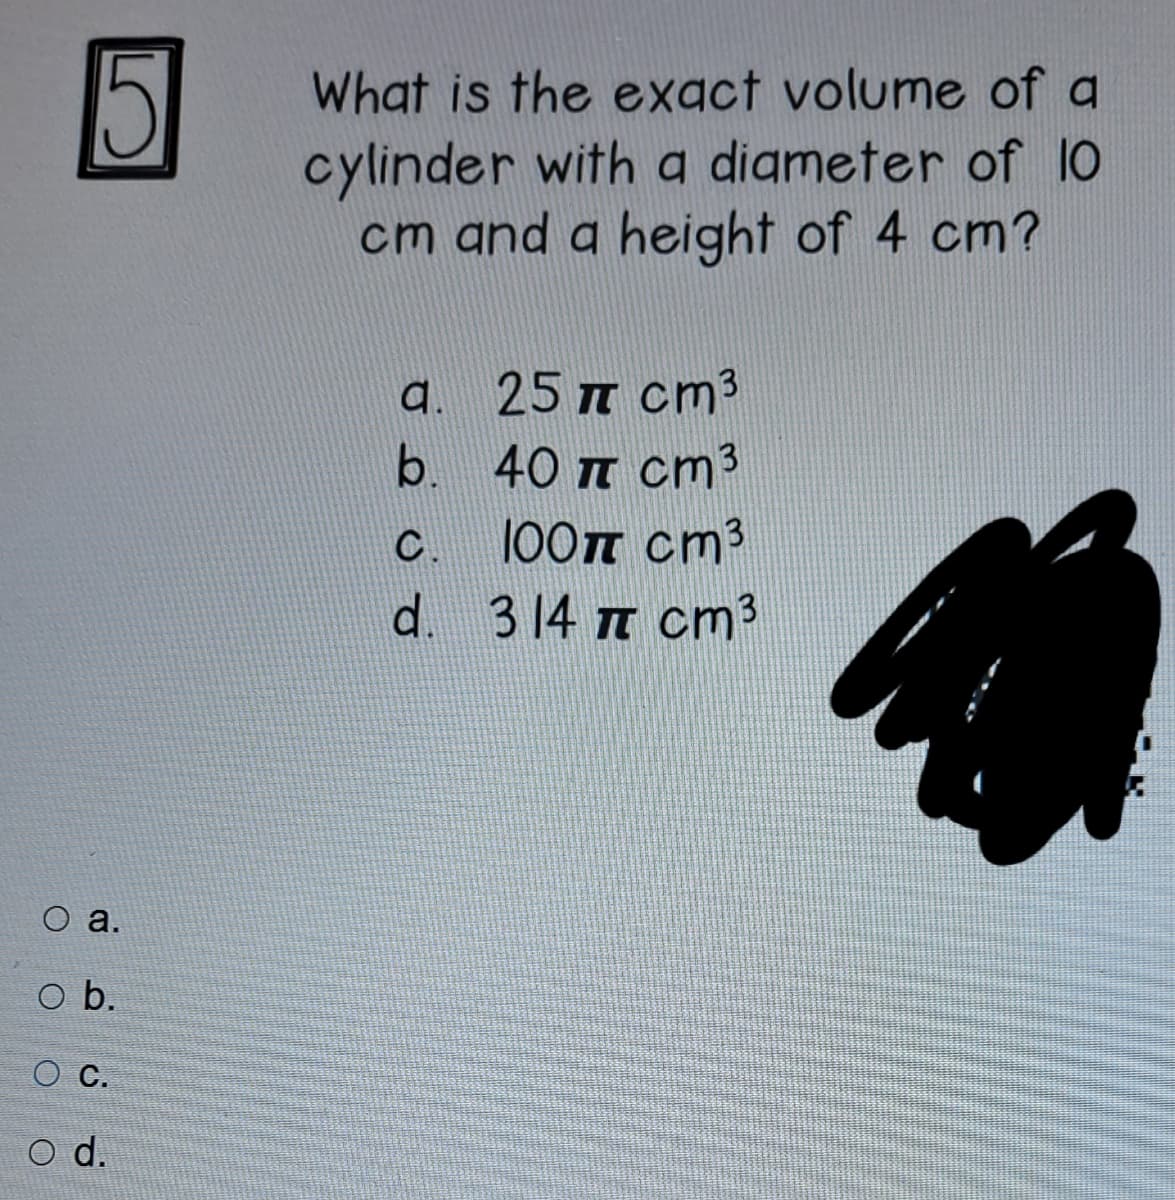 What is the exact volume of a
cylinder with a digmeter of 10
cm and a height of 4 cm?
a.
25 T cm3
b. 40 T cm3
100T cm3
d. 314 m cm3
C.
оа.
o b.
O C.
d.
